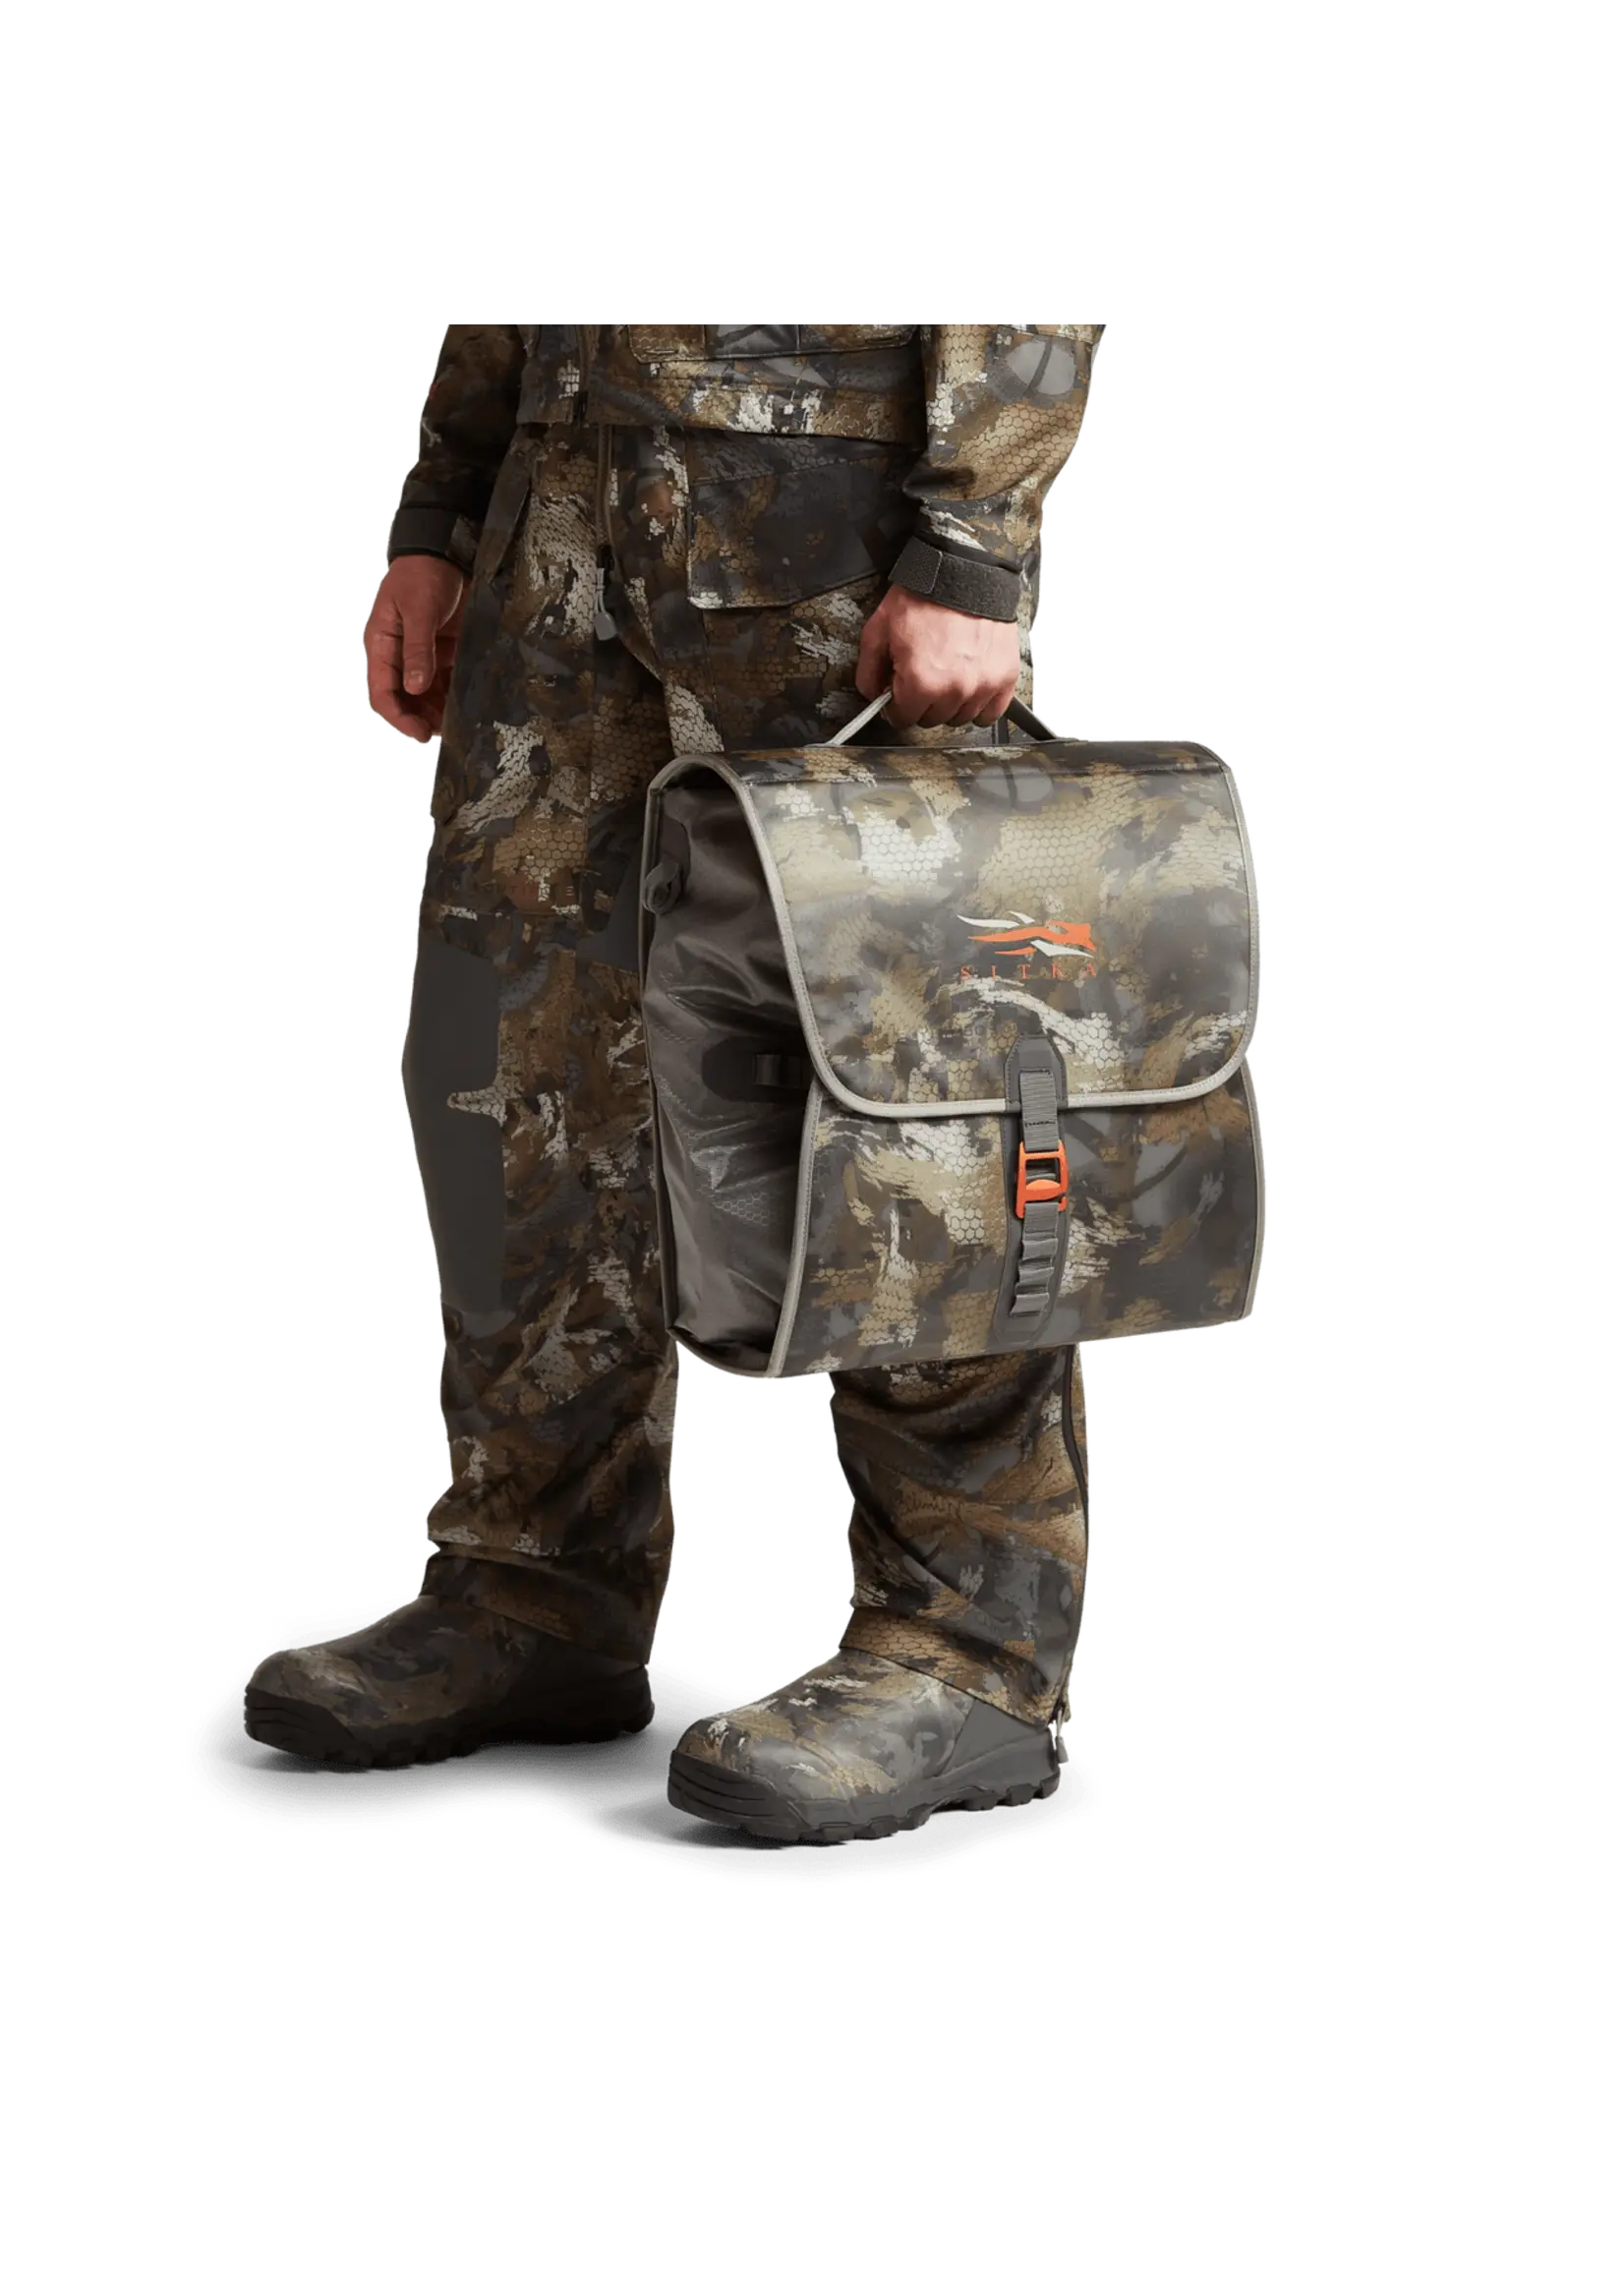 Sitka Gear Wader Storage Bag One Size Fits All